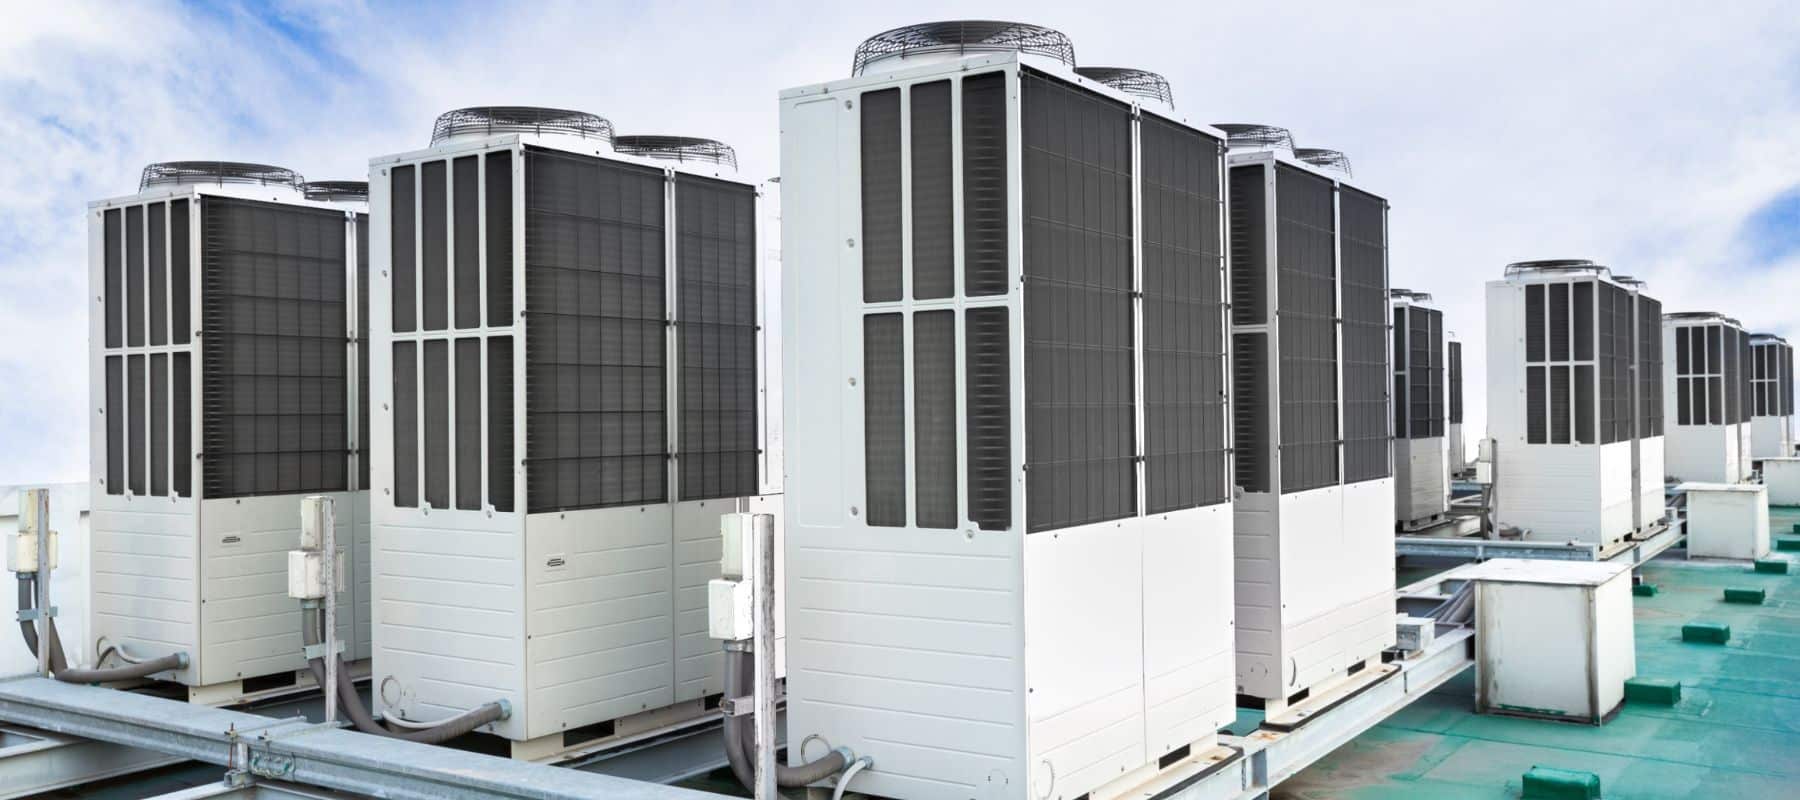 vrv/vrf systems on the roof of commercial building